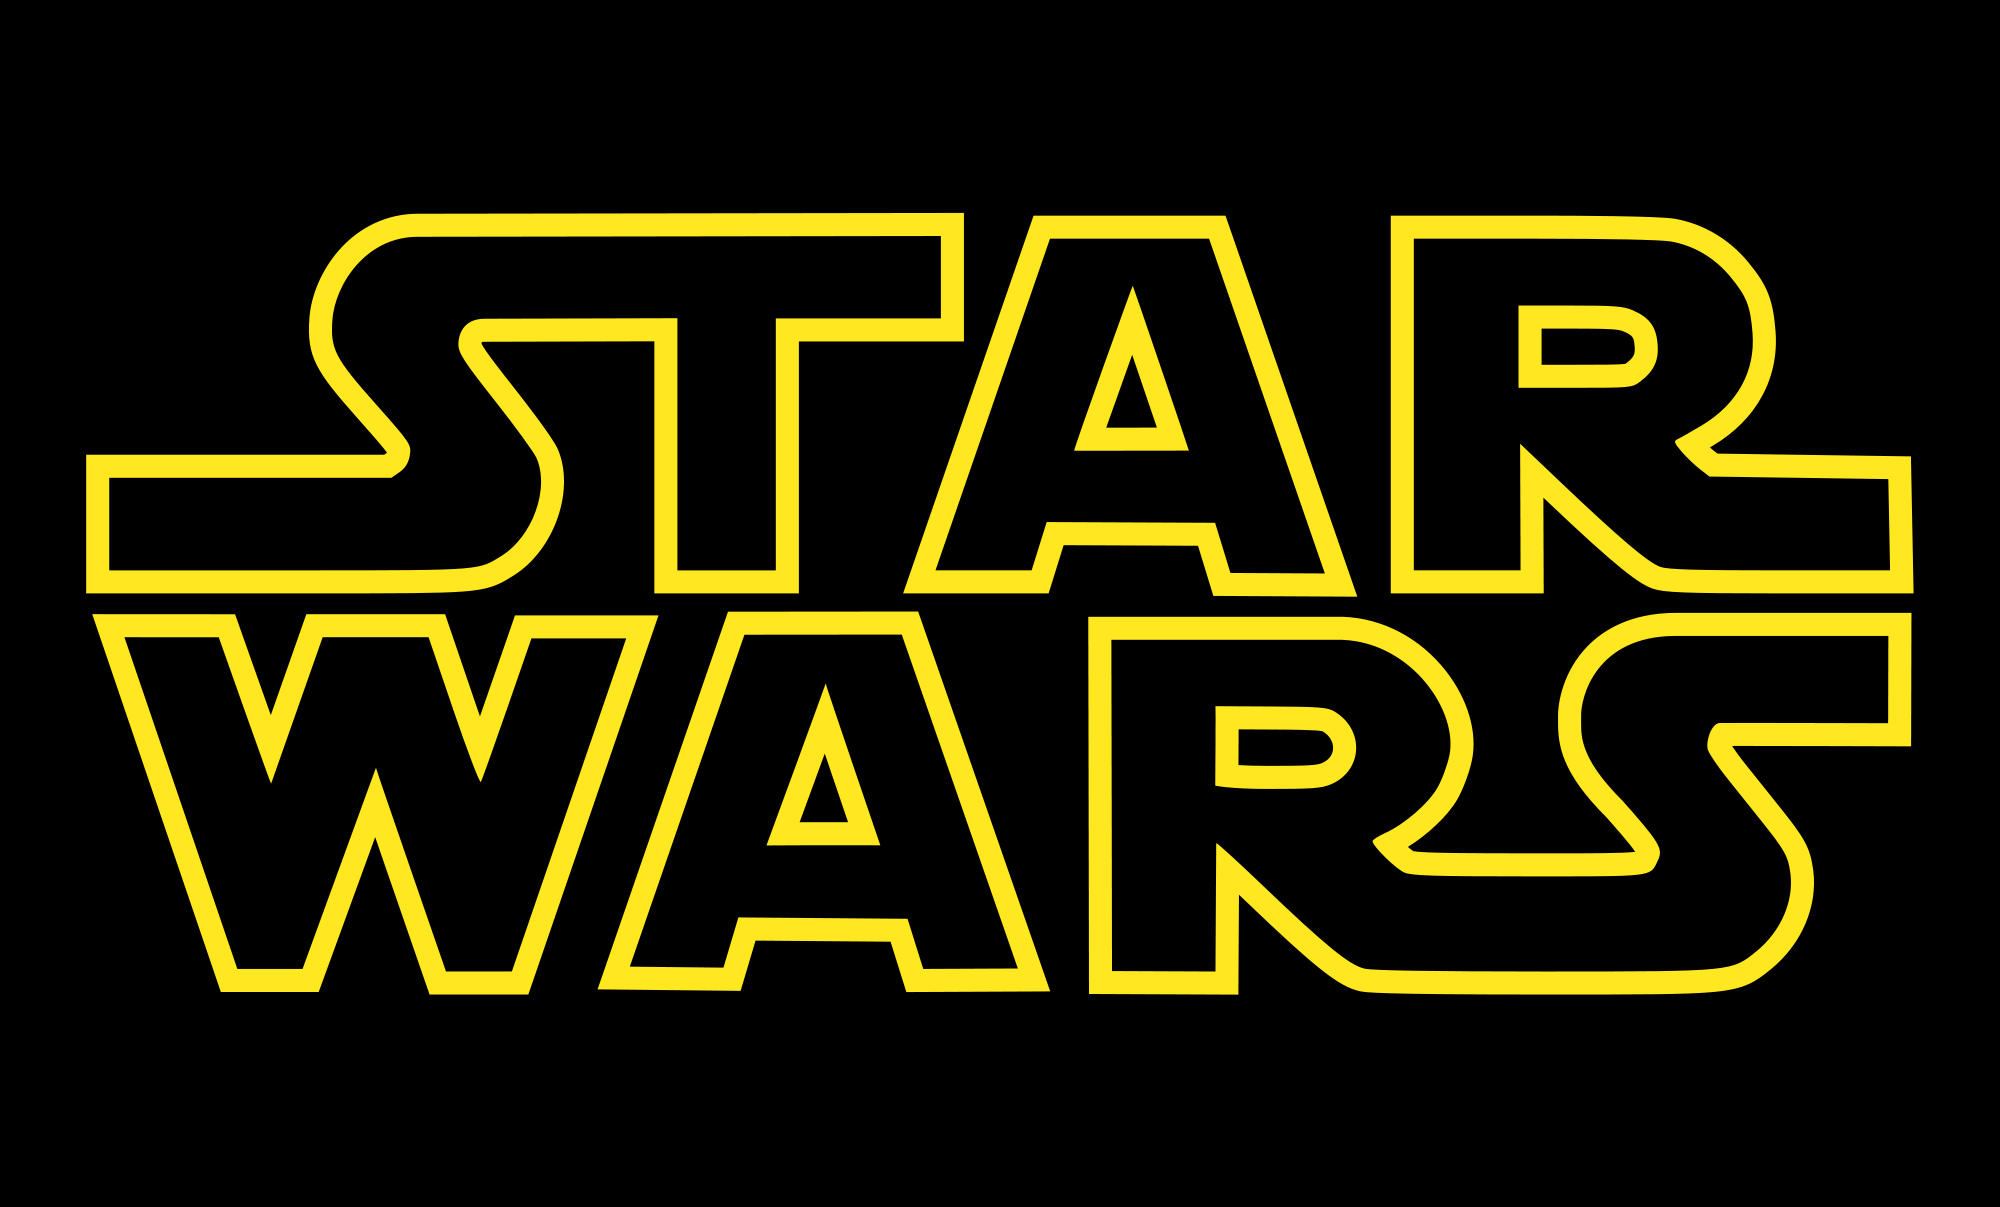 Star Wars Standalone Film Gets a Title, Director Confirmed for Episode 8